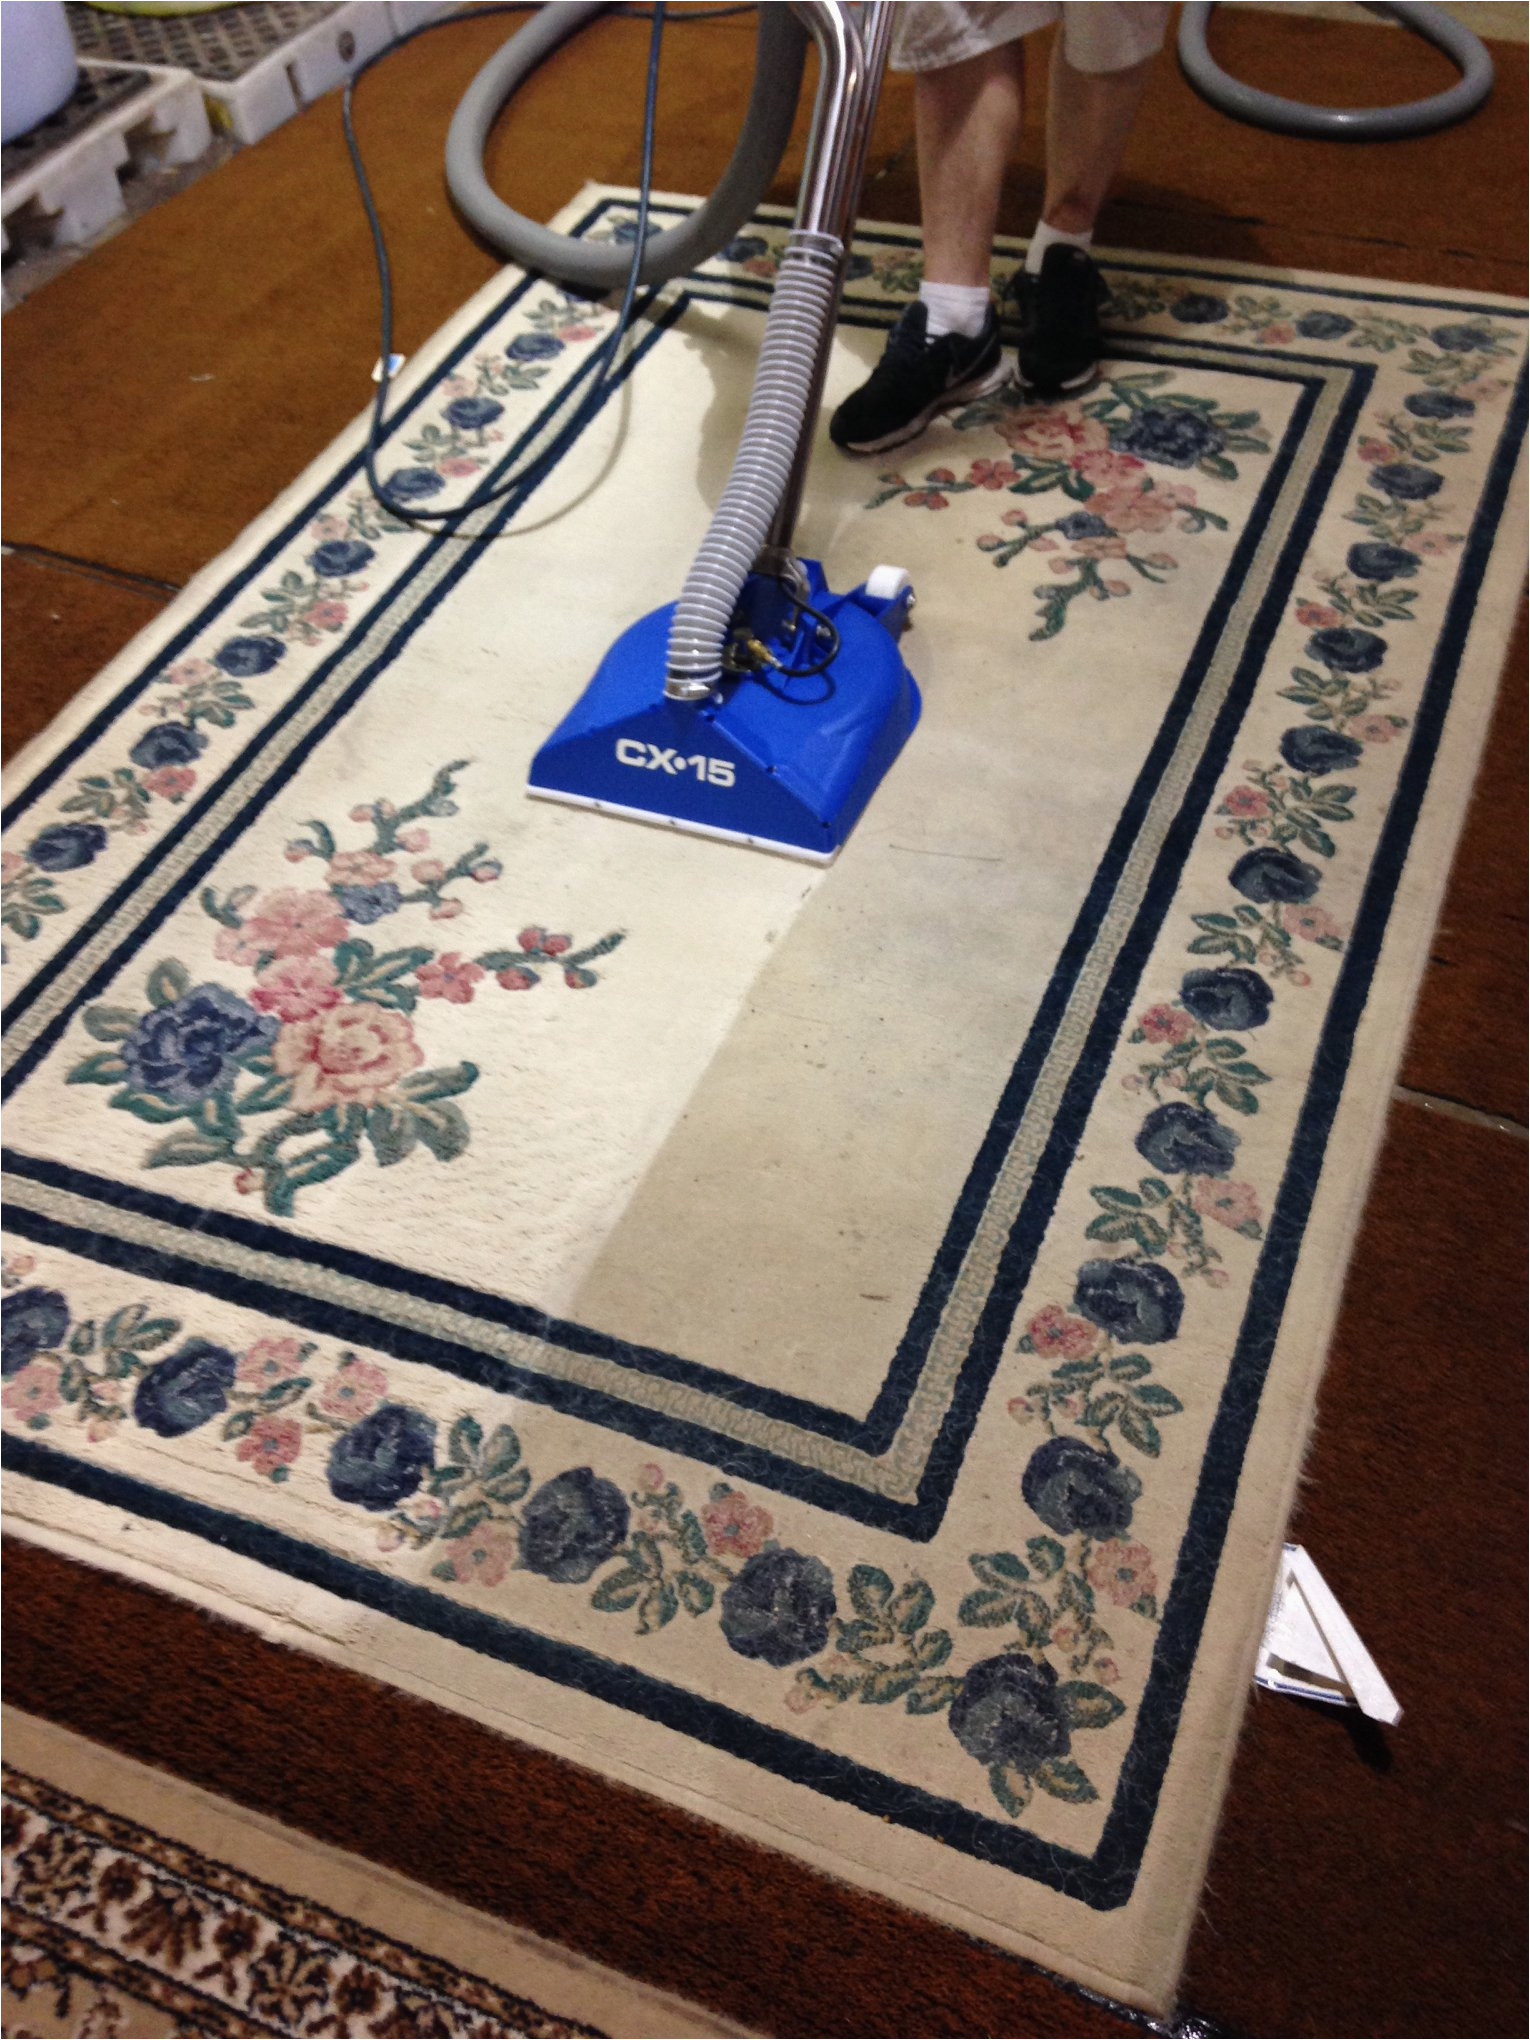 Cost to Have area Rug Cleaned How Much Does area Rug Cleaning Cost? – Terry’s Cleaning & Restoration